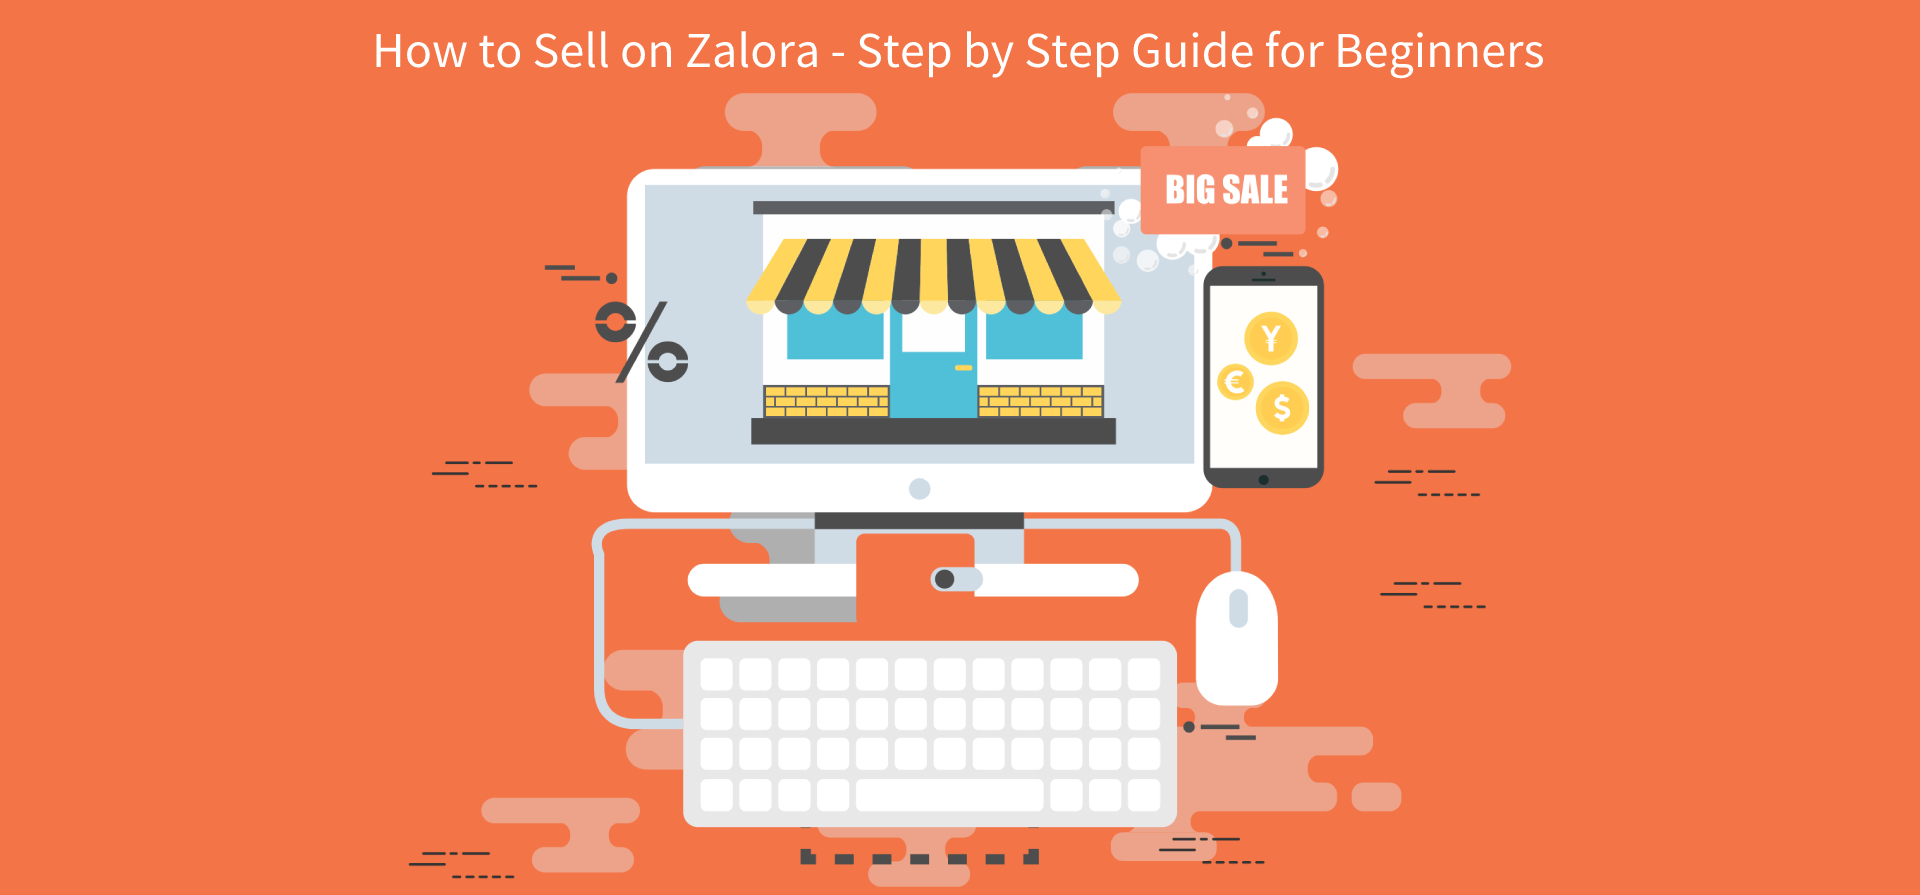 How to Sell on Zalora - Step by Step Guide for Beginners